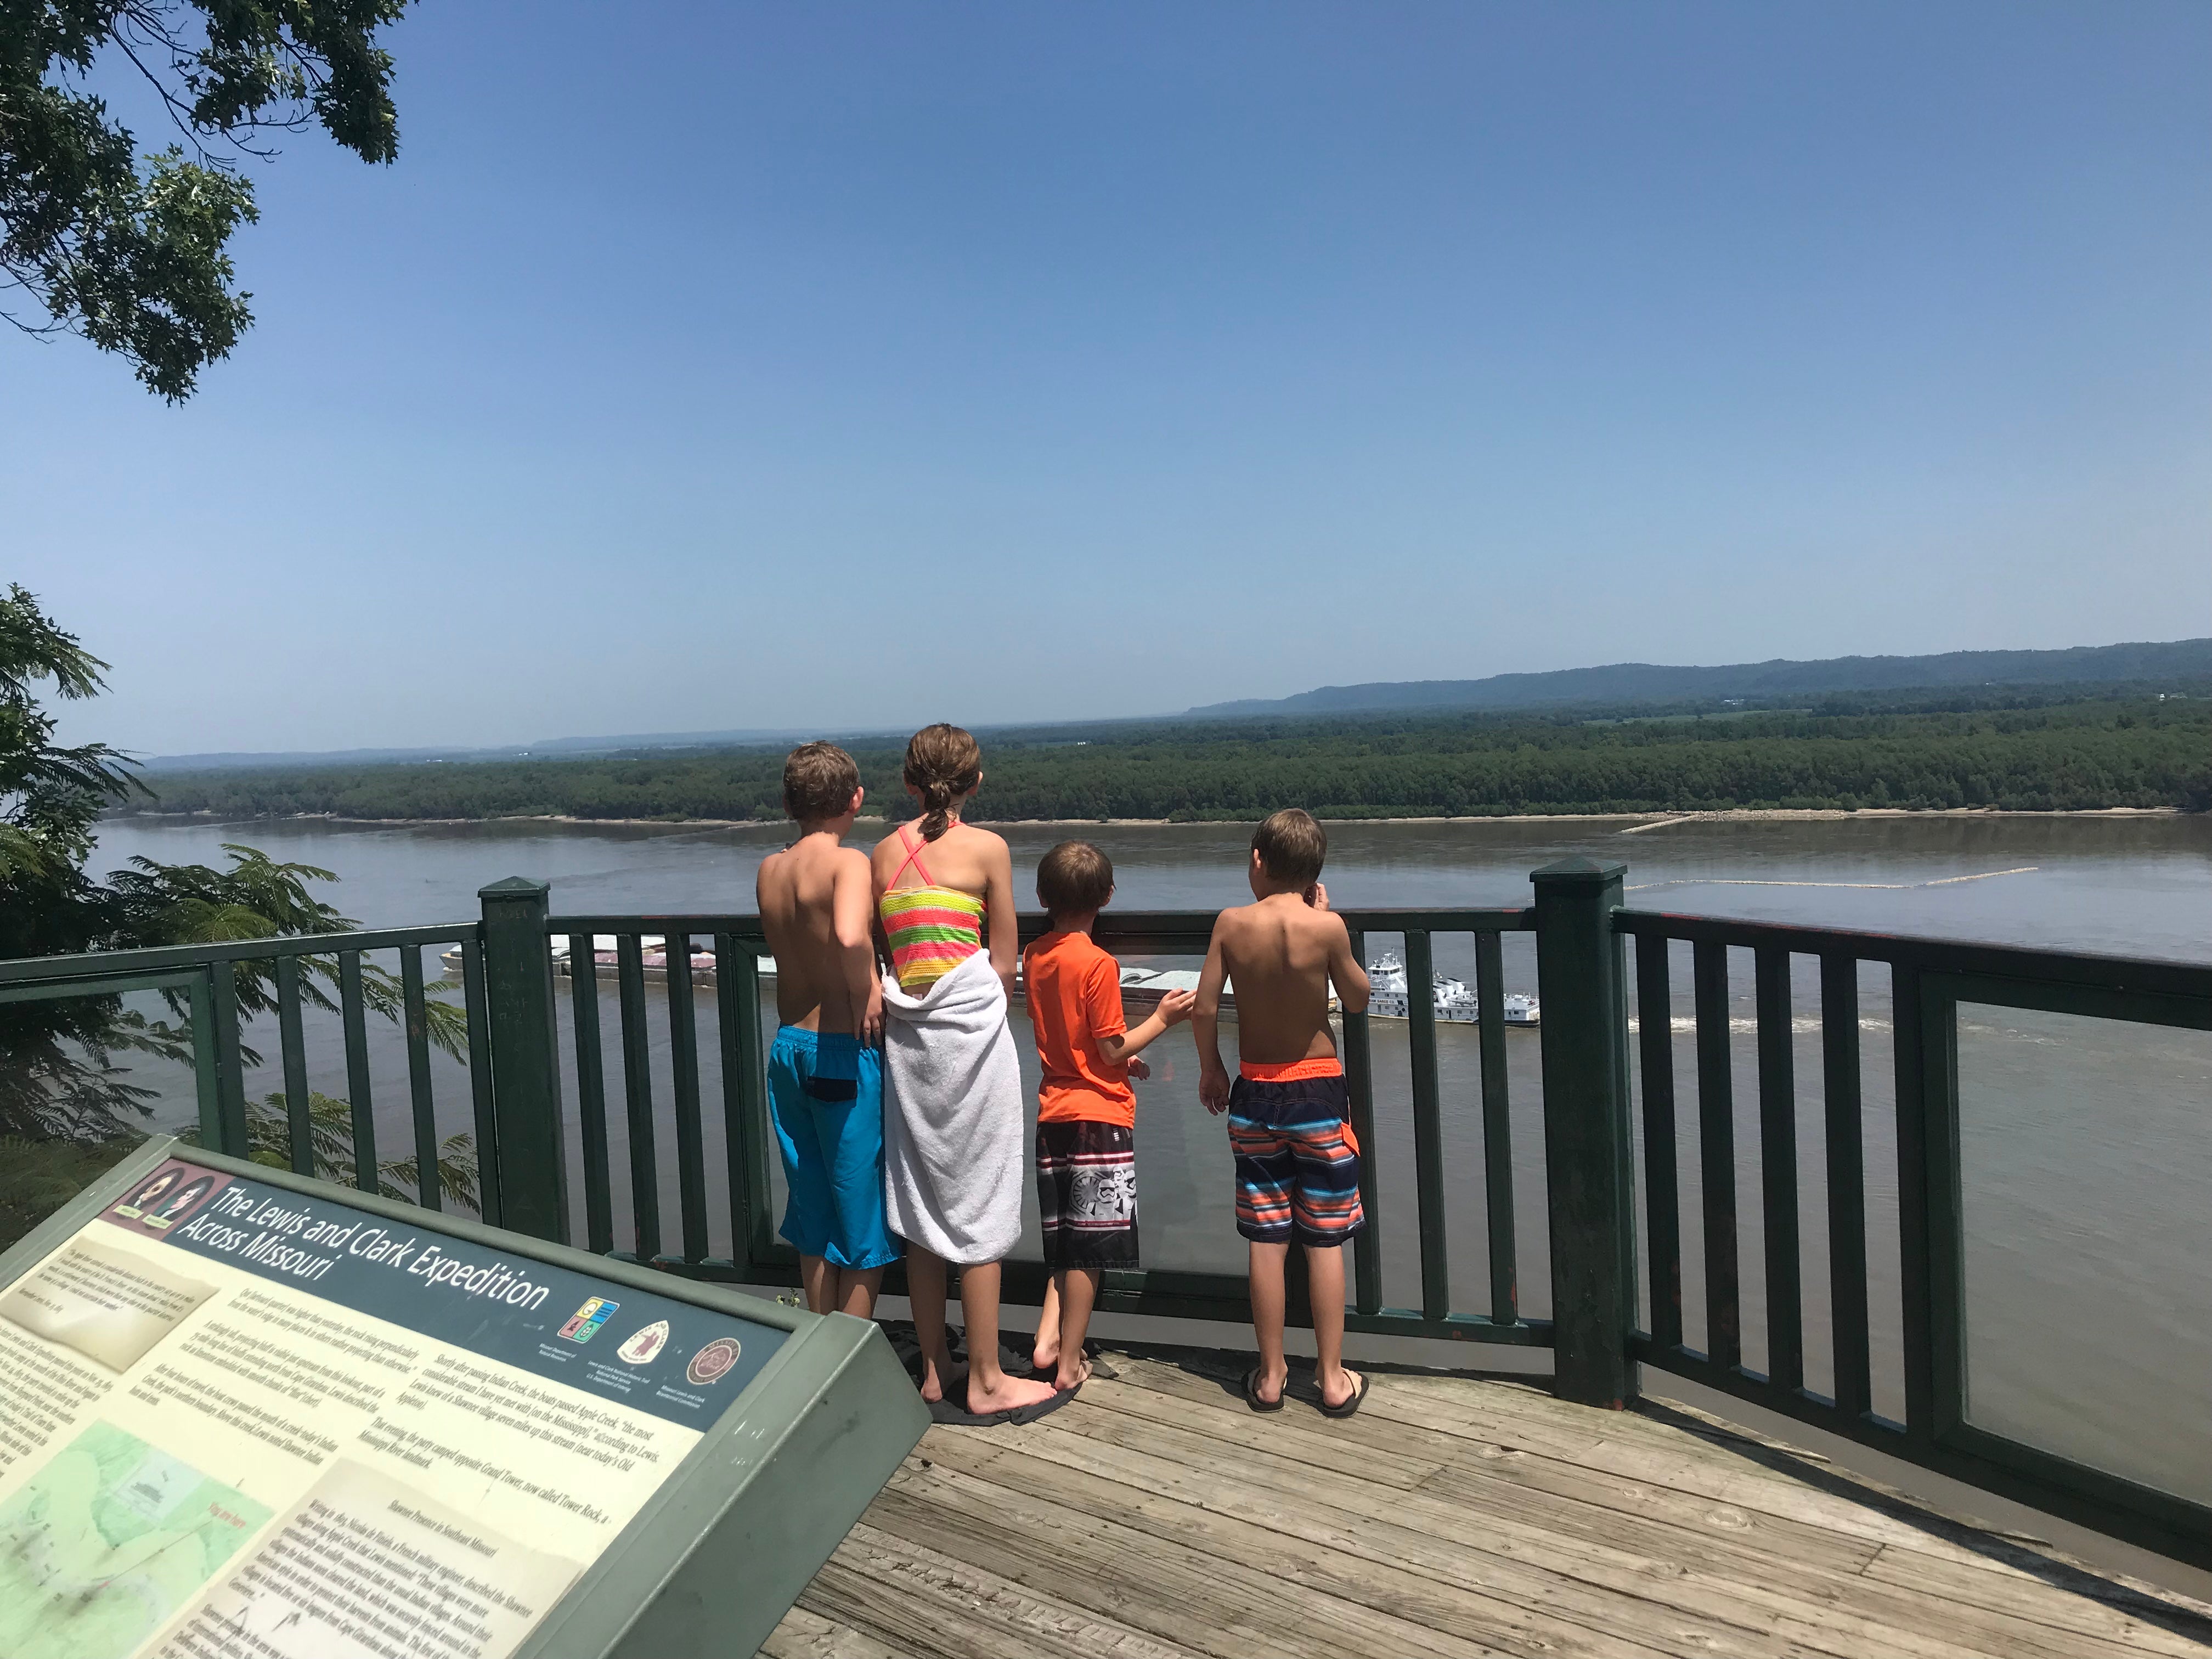 My kiddos taking in the view of the Mighty Mississippi River.